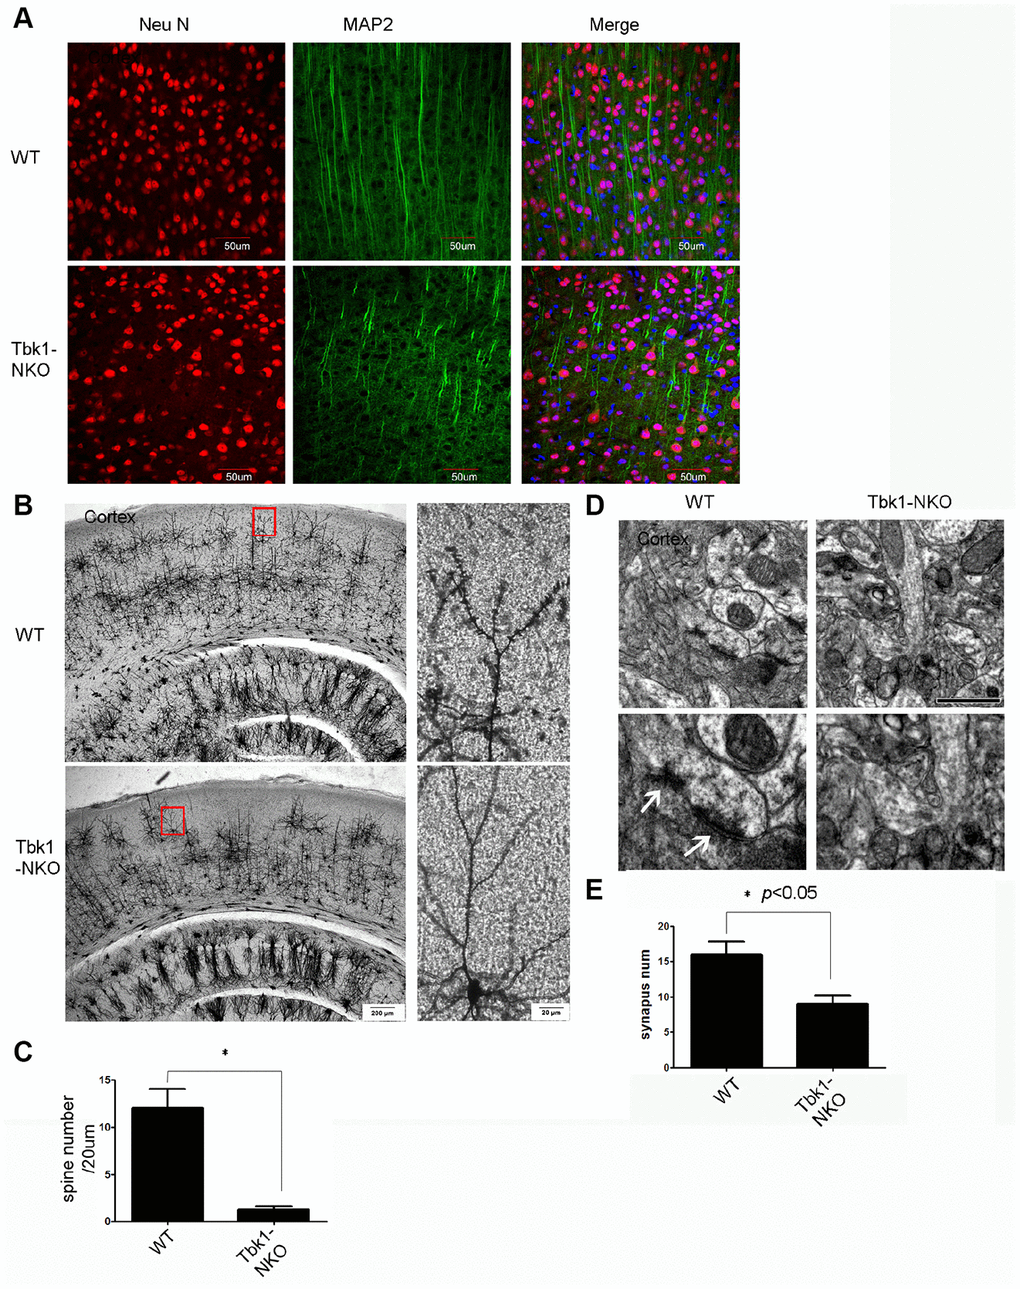 Dendro-synaptic alterations induced by Tkb1 deficiency. (A) NF and MAP2 immunofluorescence was used to visualize dendrites. (B) Golgi-Cox brain staining in Tbk1-NKO and WT mice (n = 3). (C) Analysis of dendritic spine density (n = 10). *P D–E) Cortical synapse numbers, quantified from electron microscopy images (n = 6-7). *P 